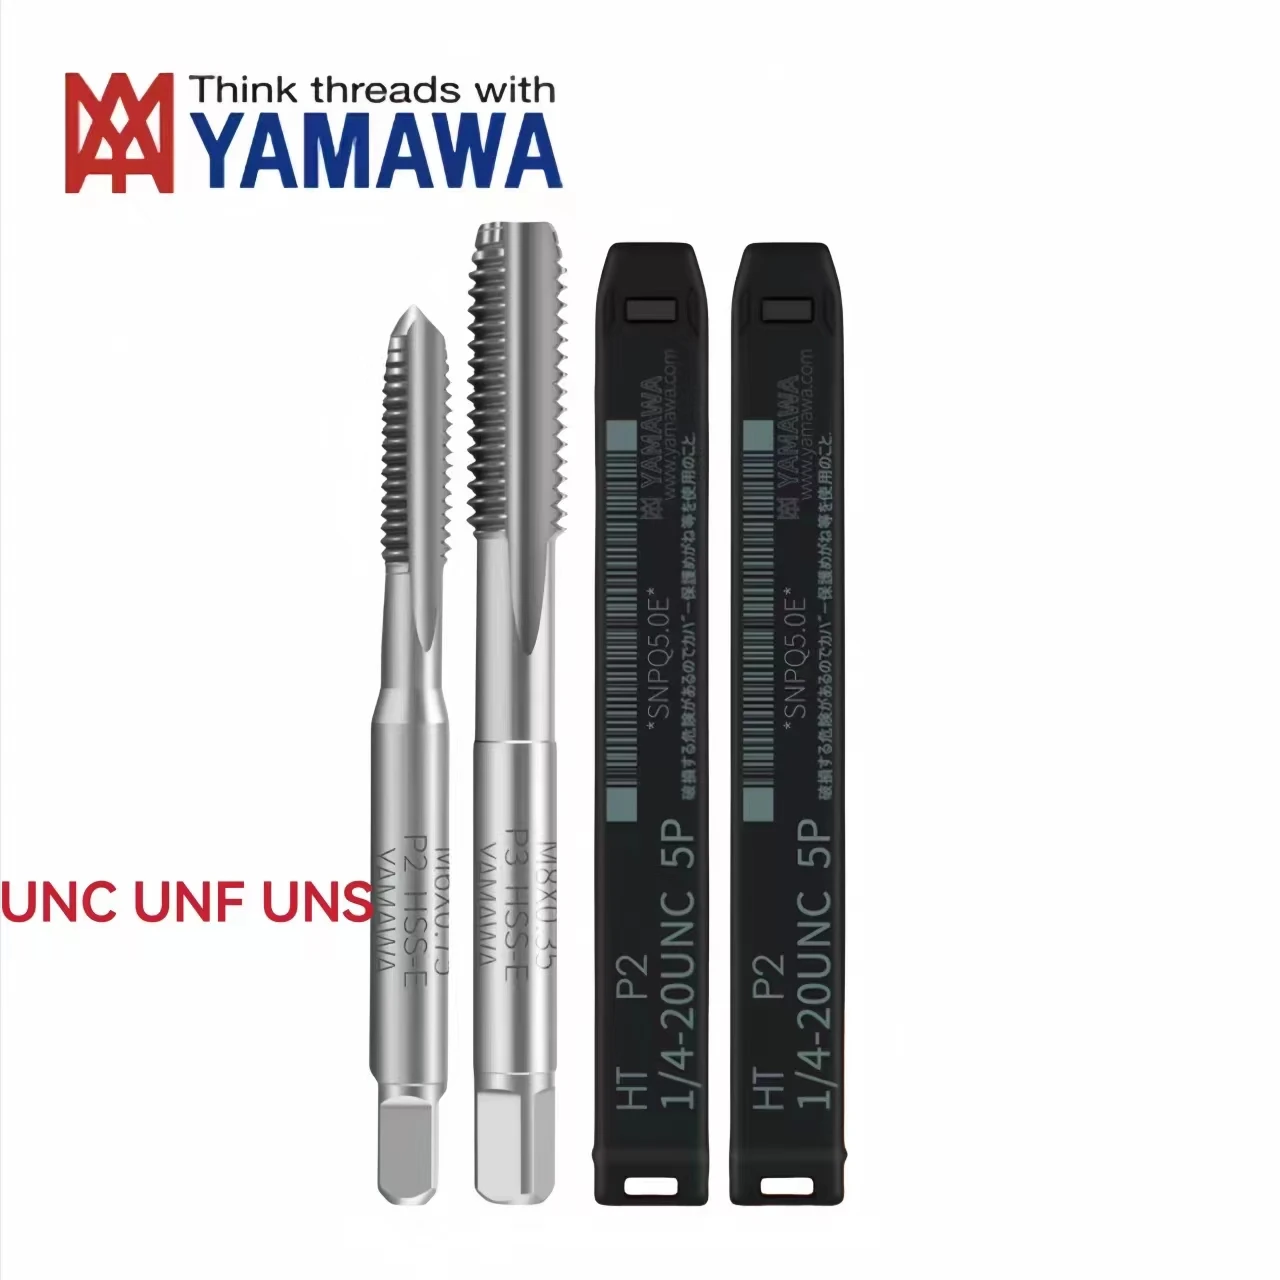 

YAMAWA HSSE Straight Grooved Tap UNC UNF UNS1-64 2-56 3-48 5-40 6-32 8-32 3/16 10-24 1/4 5/16 3/8 7/16 1/2 3/4 Screw Thread Taps